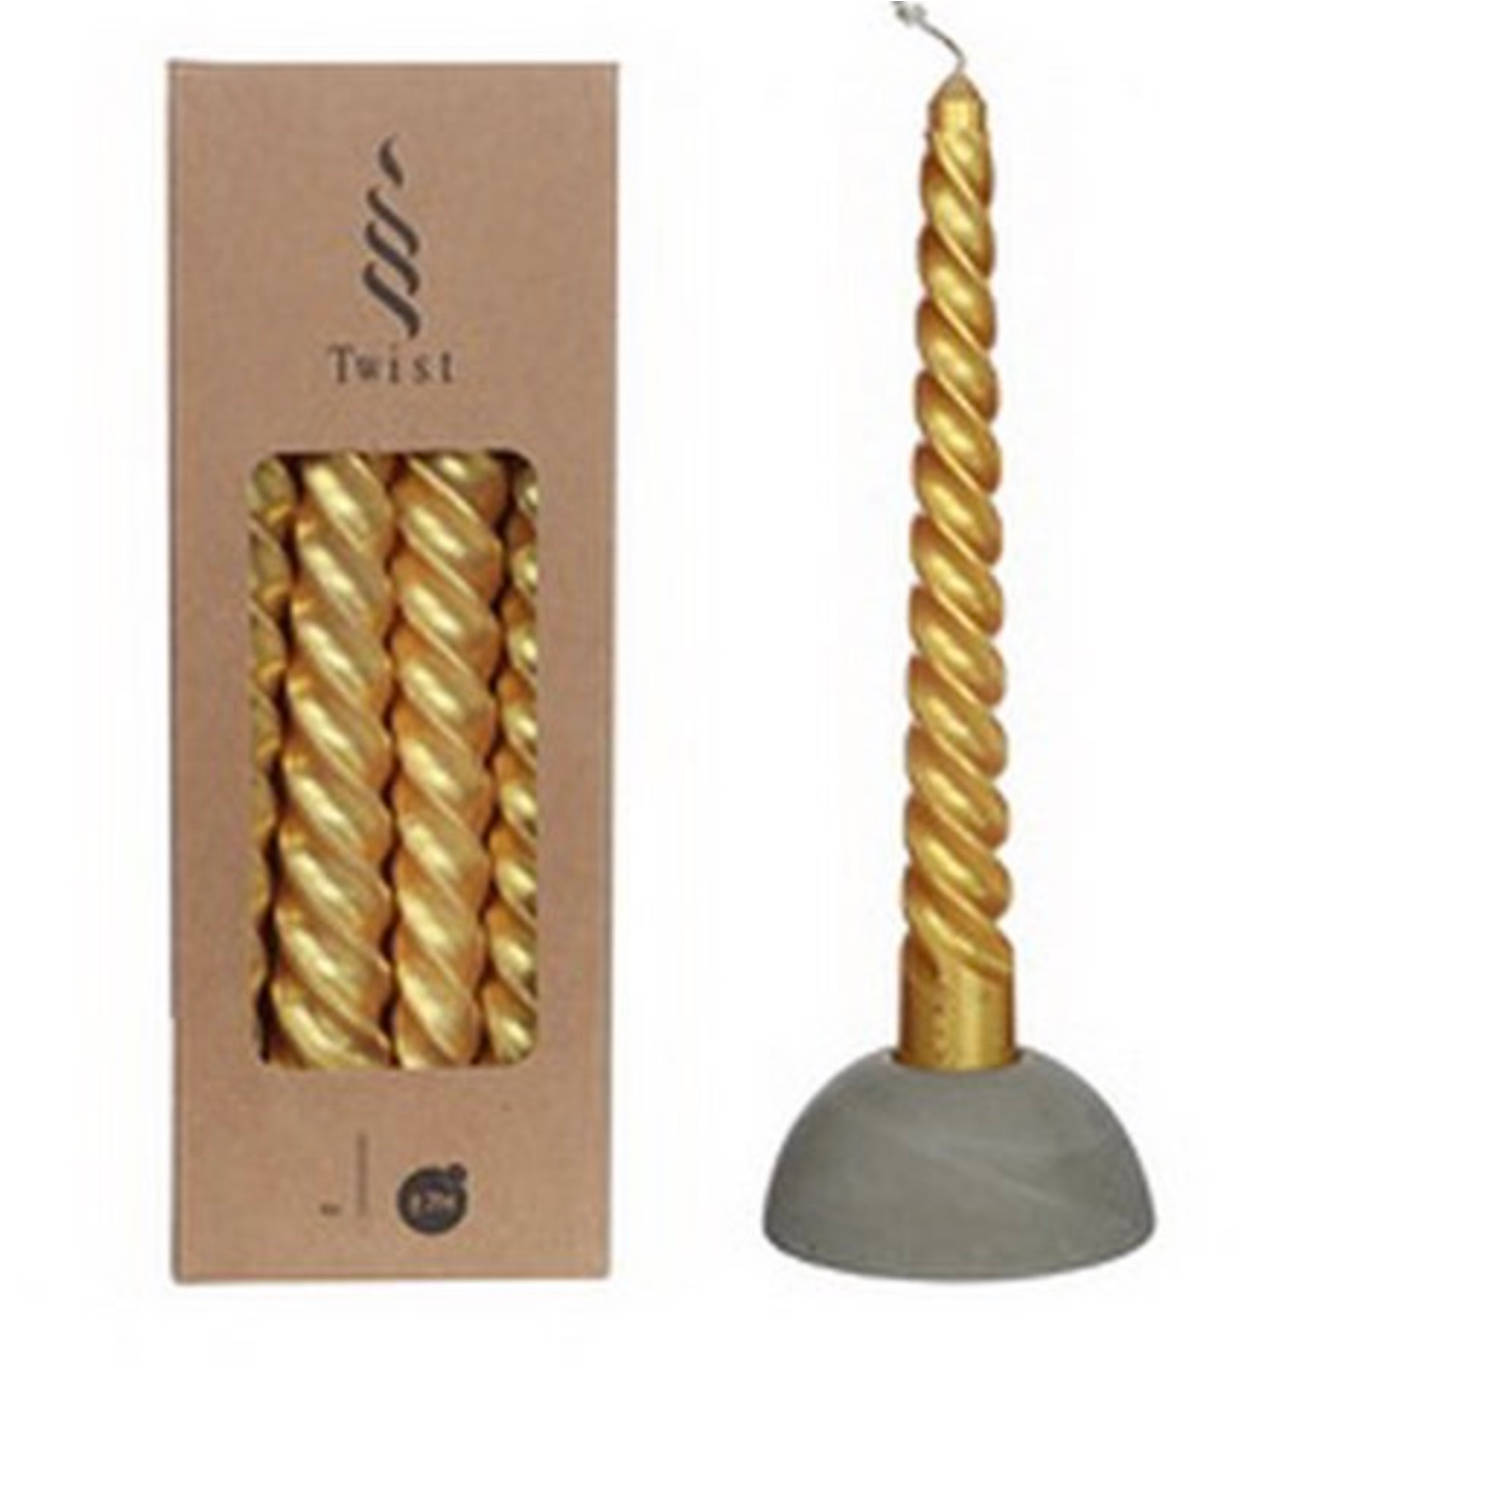 Twisted Candles Set 4 st. Gold Metallic